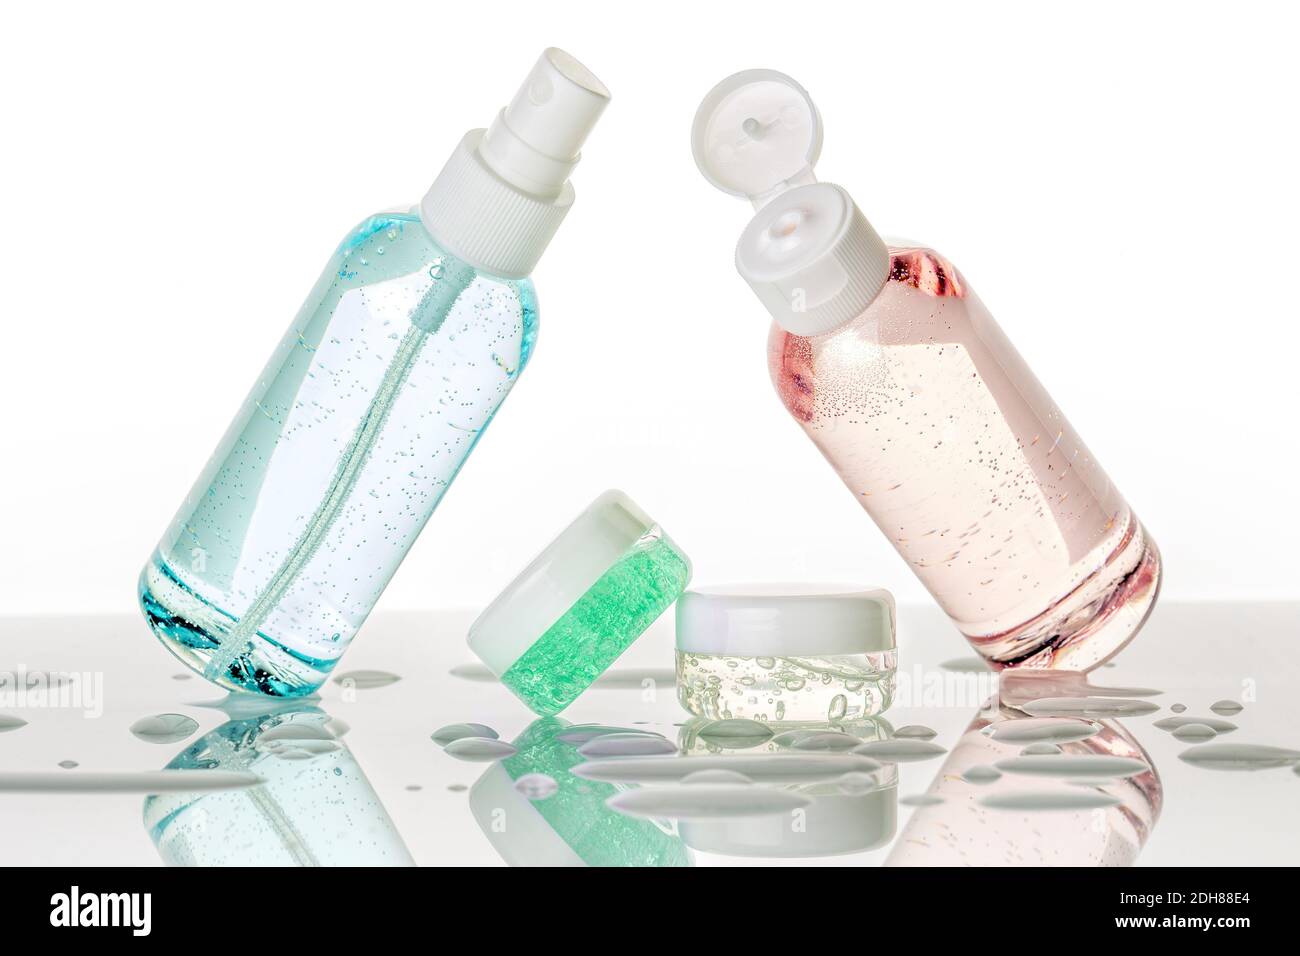 assorted toiletries and water droplets on white background Stock Photo